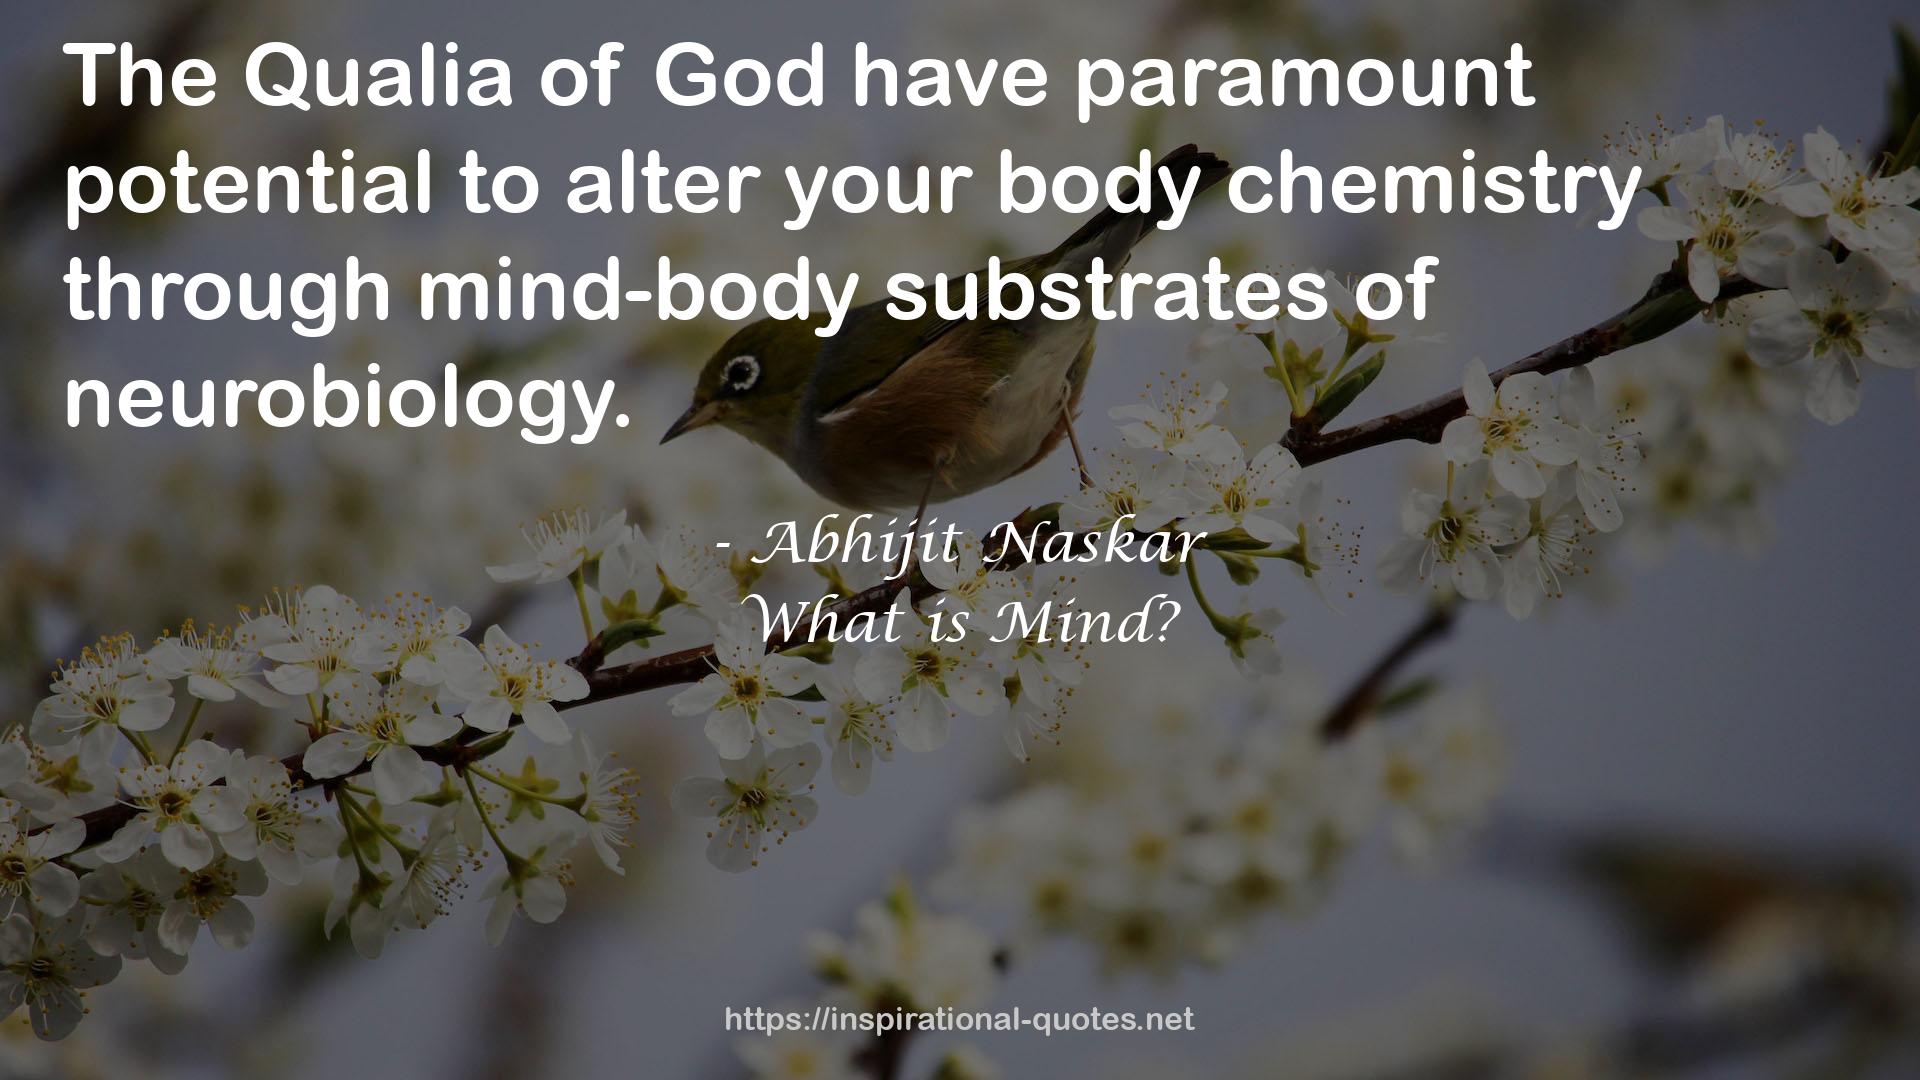 mind-body substrates  QUOTES